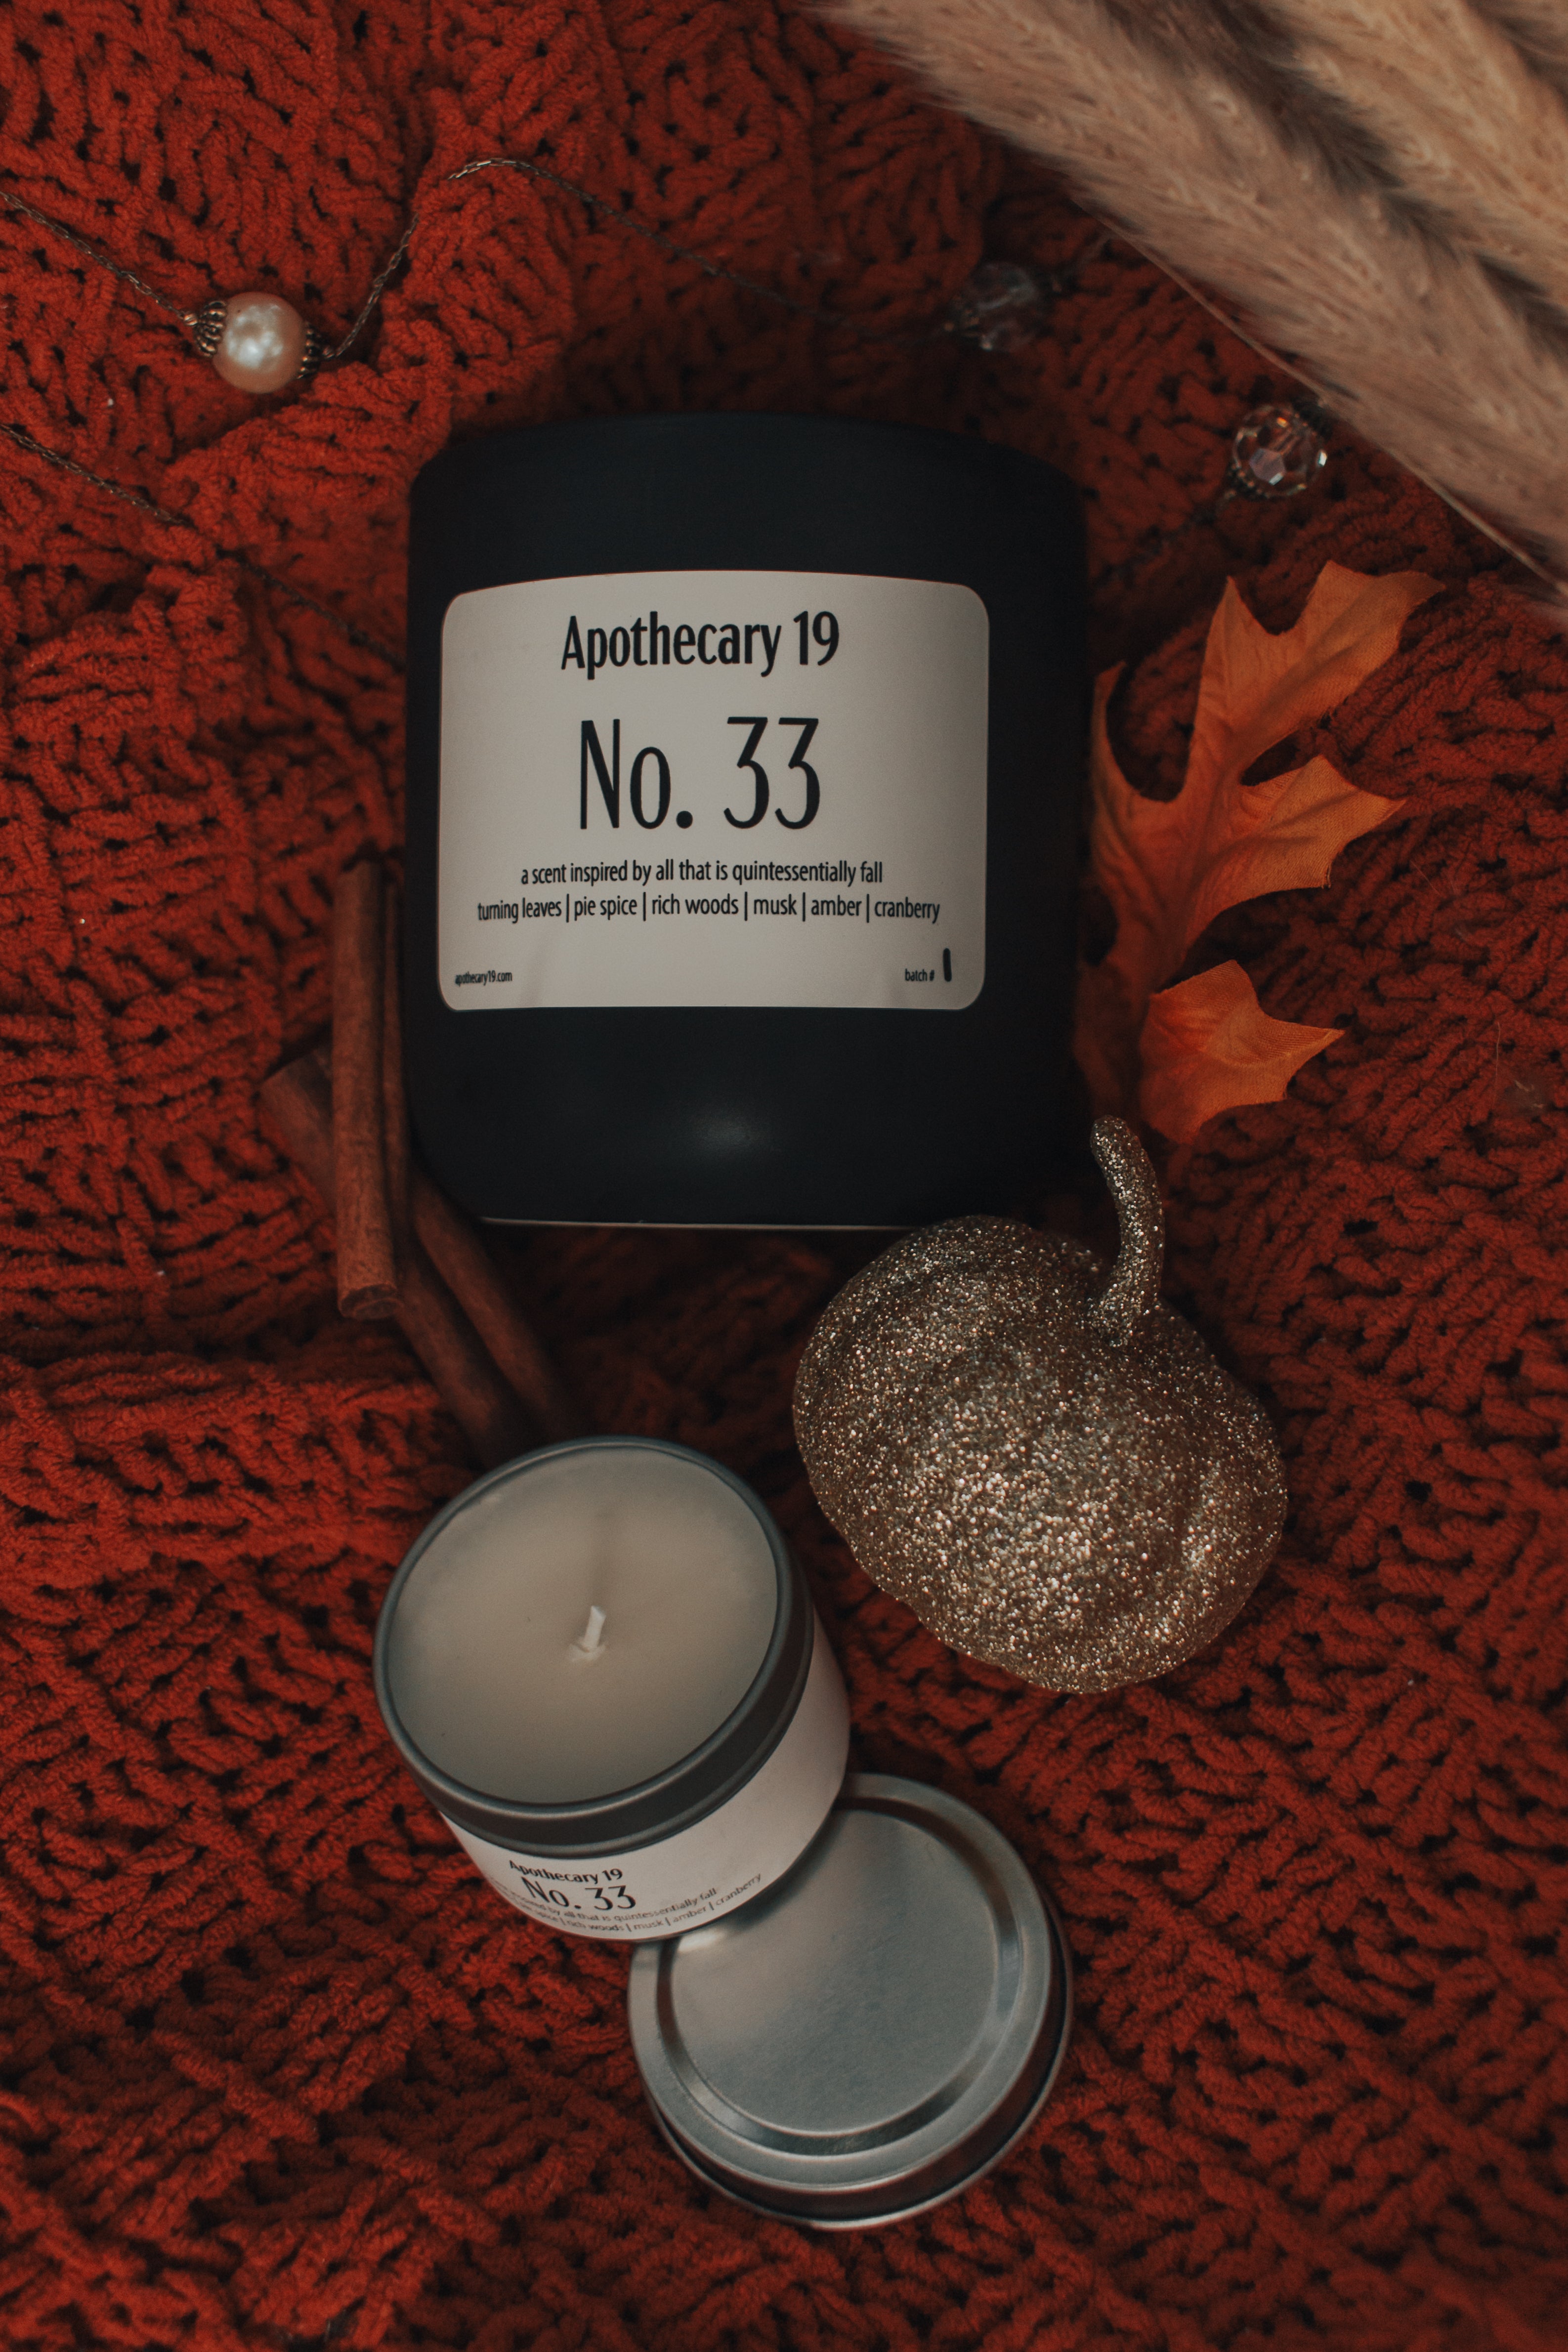 No. 33 - a scent inspired by all things quintessentially fall